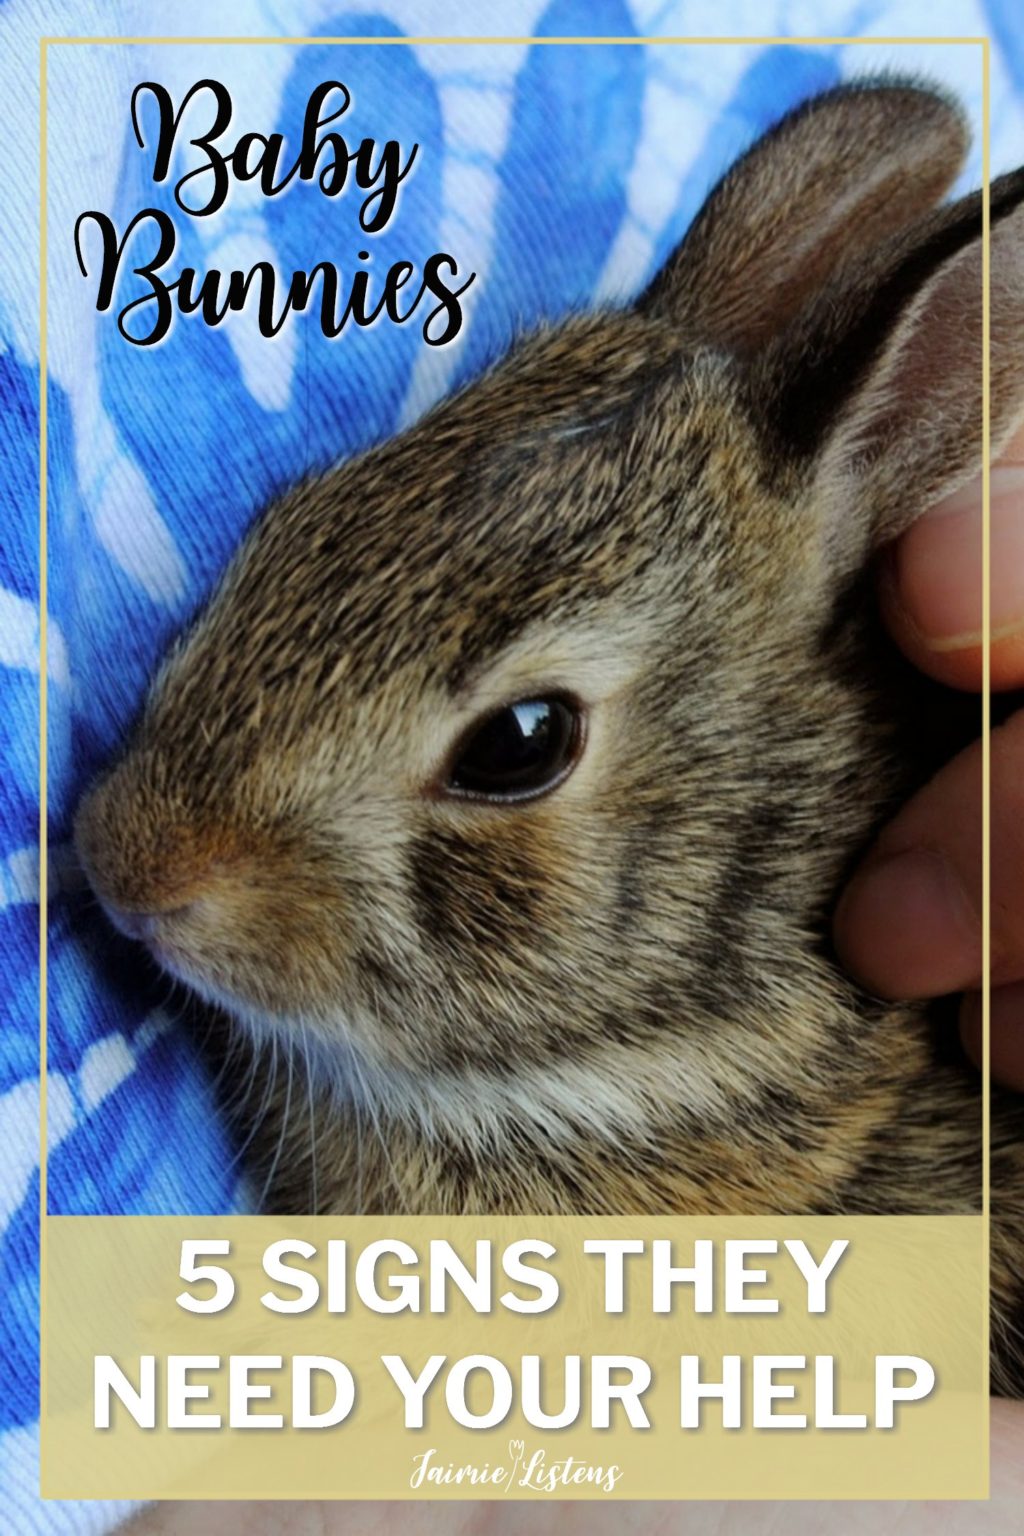 Baby Rabbits: 5 Signs They Need You to Intervene - Jaimie Listens: You found a nest of wild baby rabbits and it seems they have been abandoned by their mother. It’s good to know what to look for before taking charge of their care.